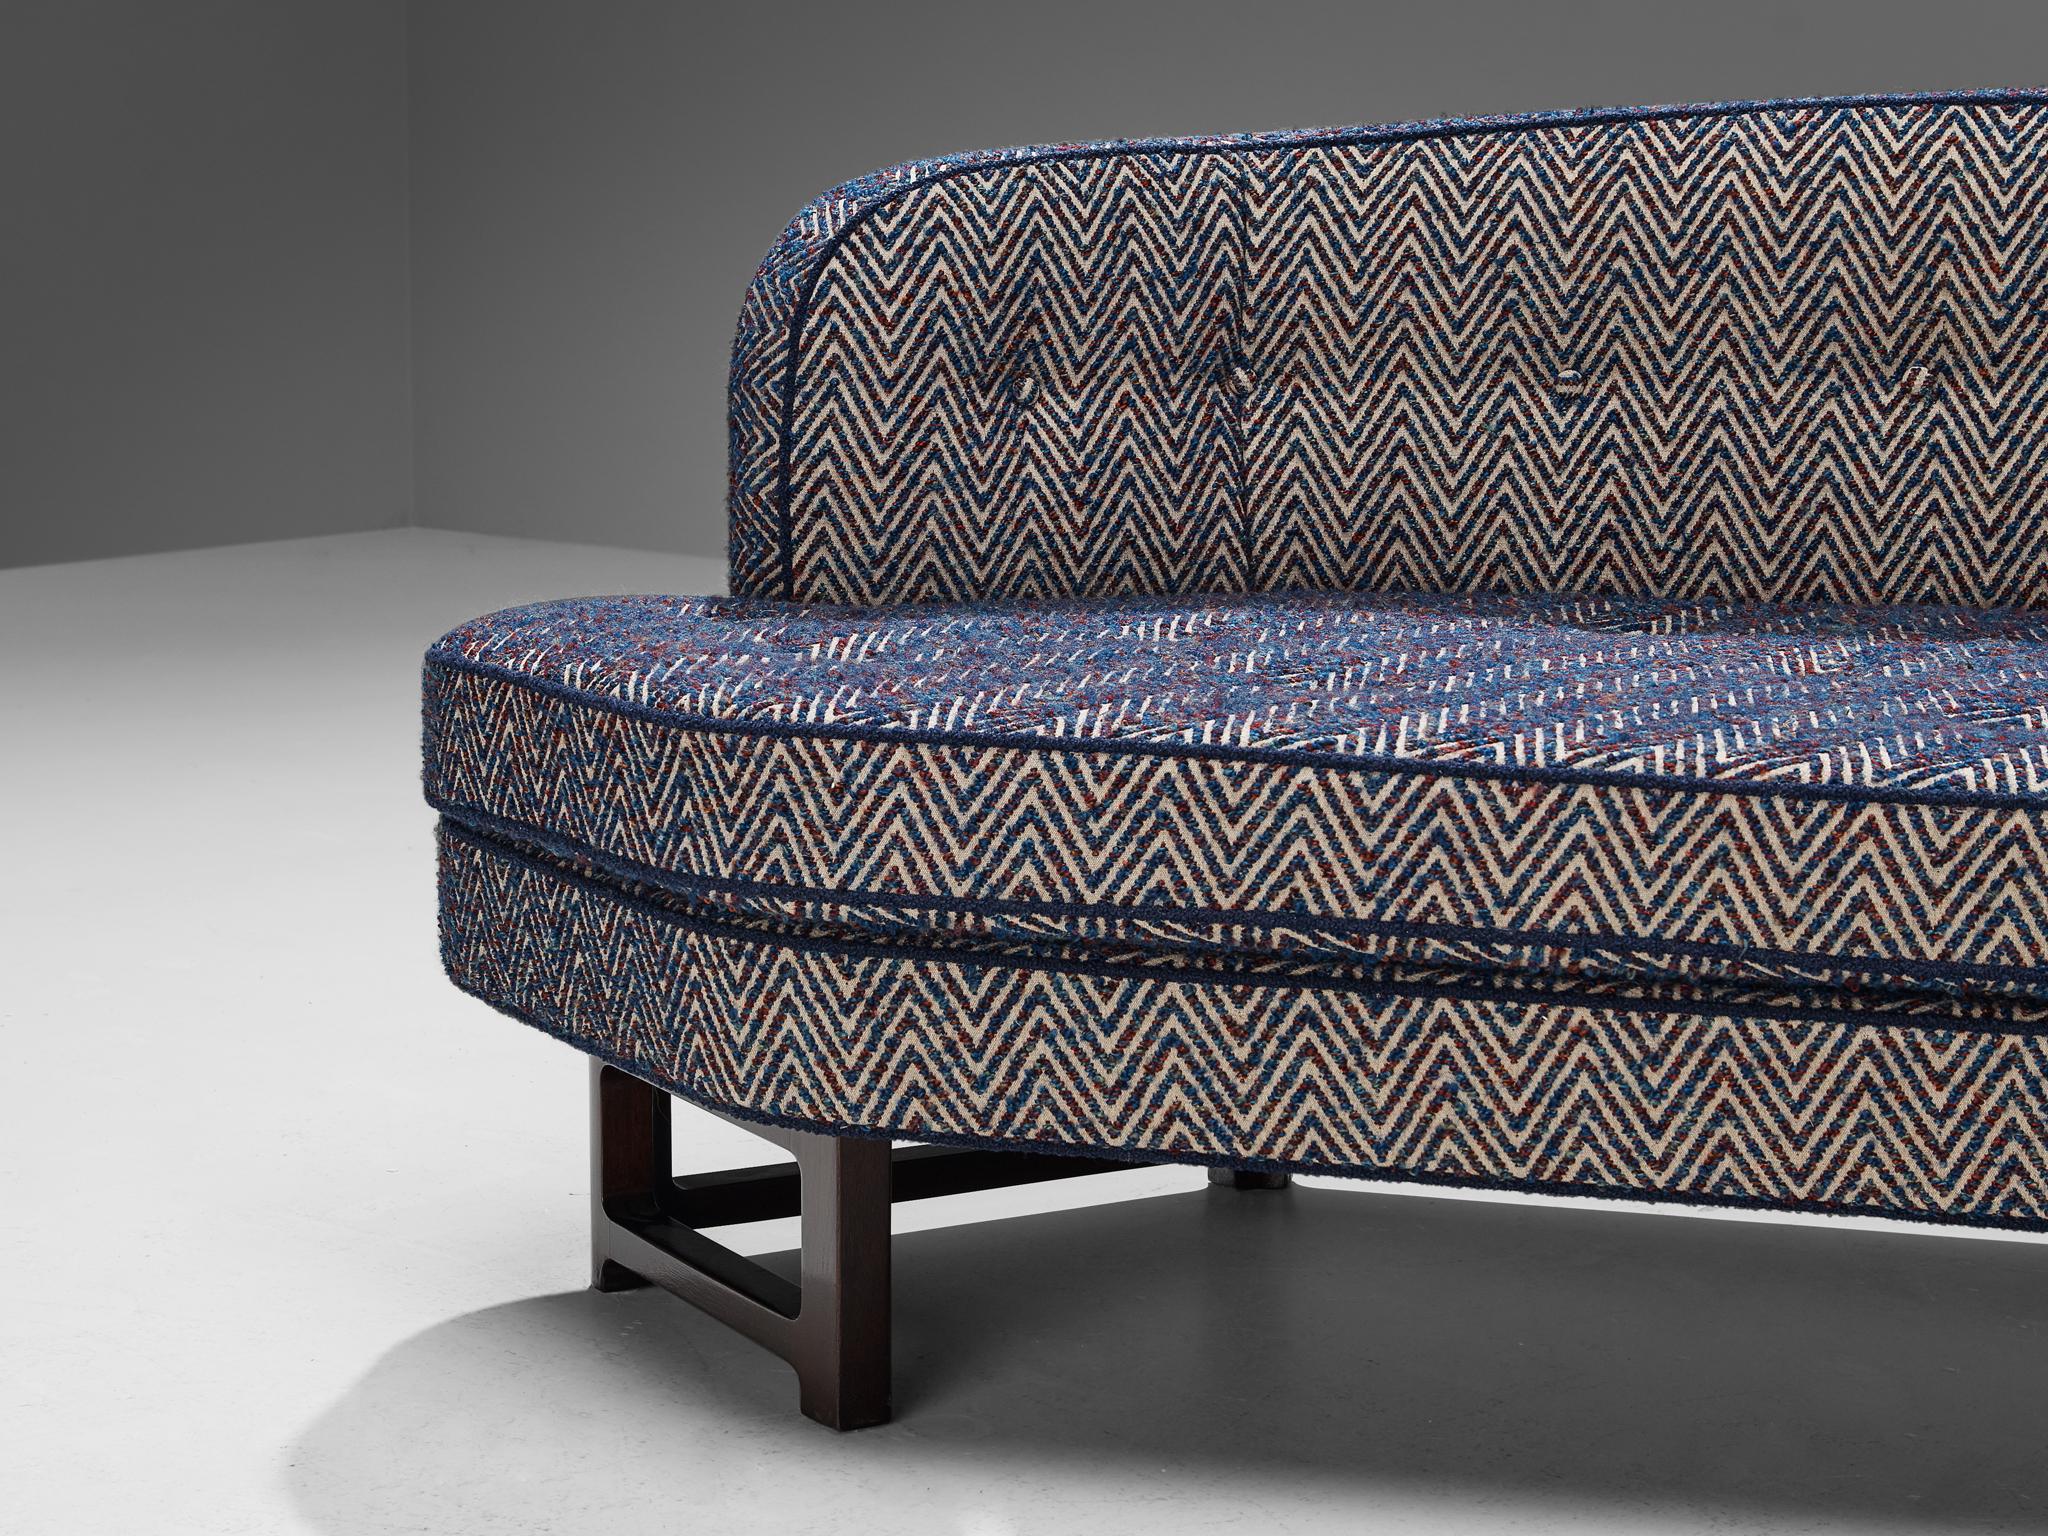 Fabric Edward Wormley for Dunbar 'Janus' Sofa in Multicolored Patterned Upholstery 